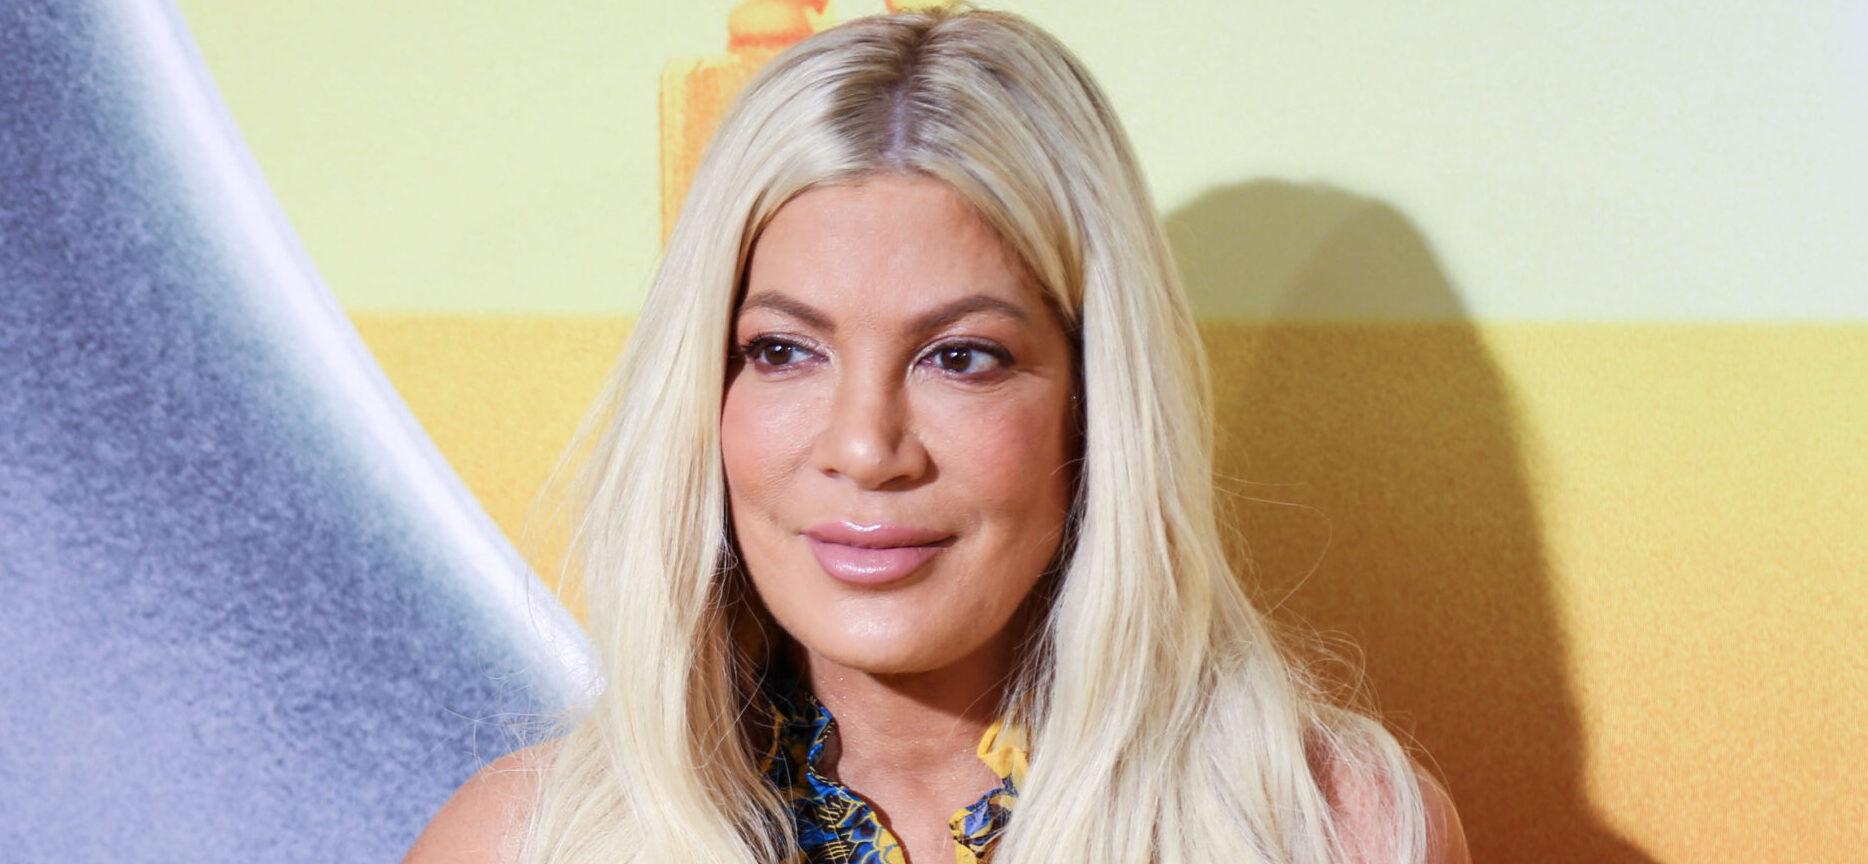 Tori Spelling Blasted By Fans For Twerking At Her Kid’s Basketball Game: ‘So Cringe’